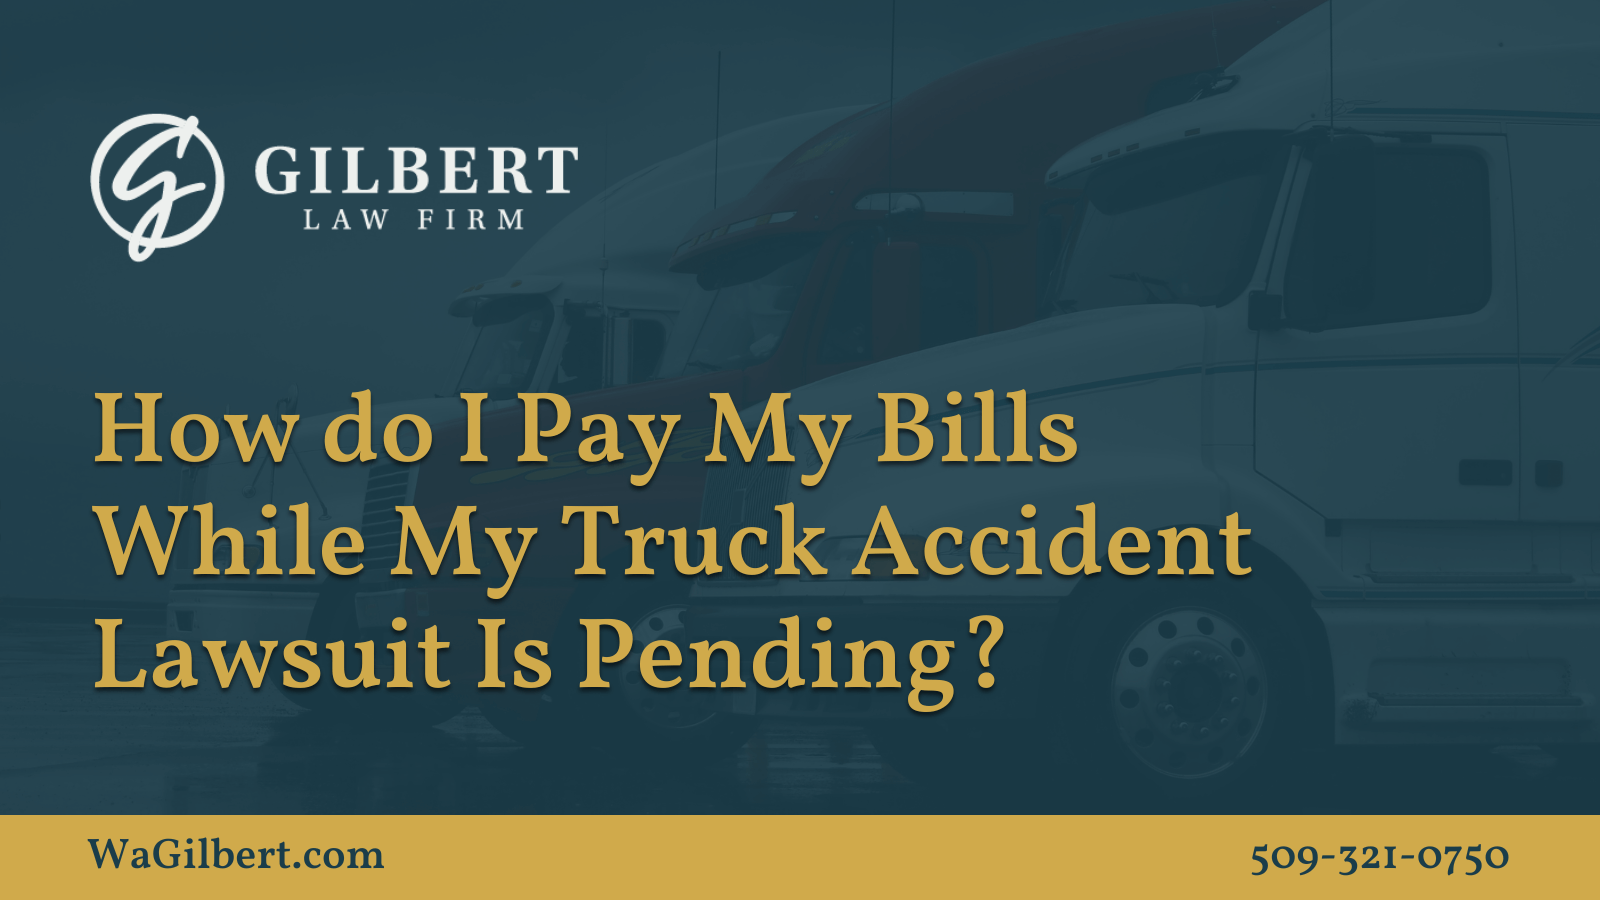 How do I Pay My Bills While My Truck Accident Lawsuit Is Pending | Gilbert Law Firm Spokane Washington